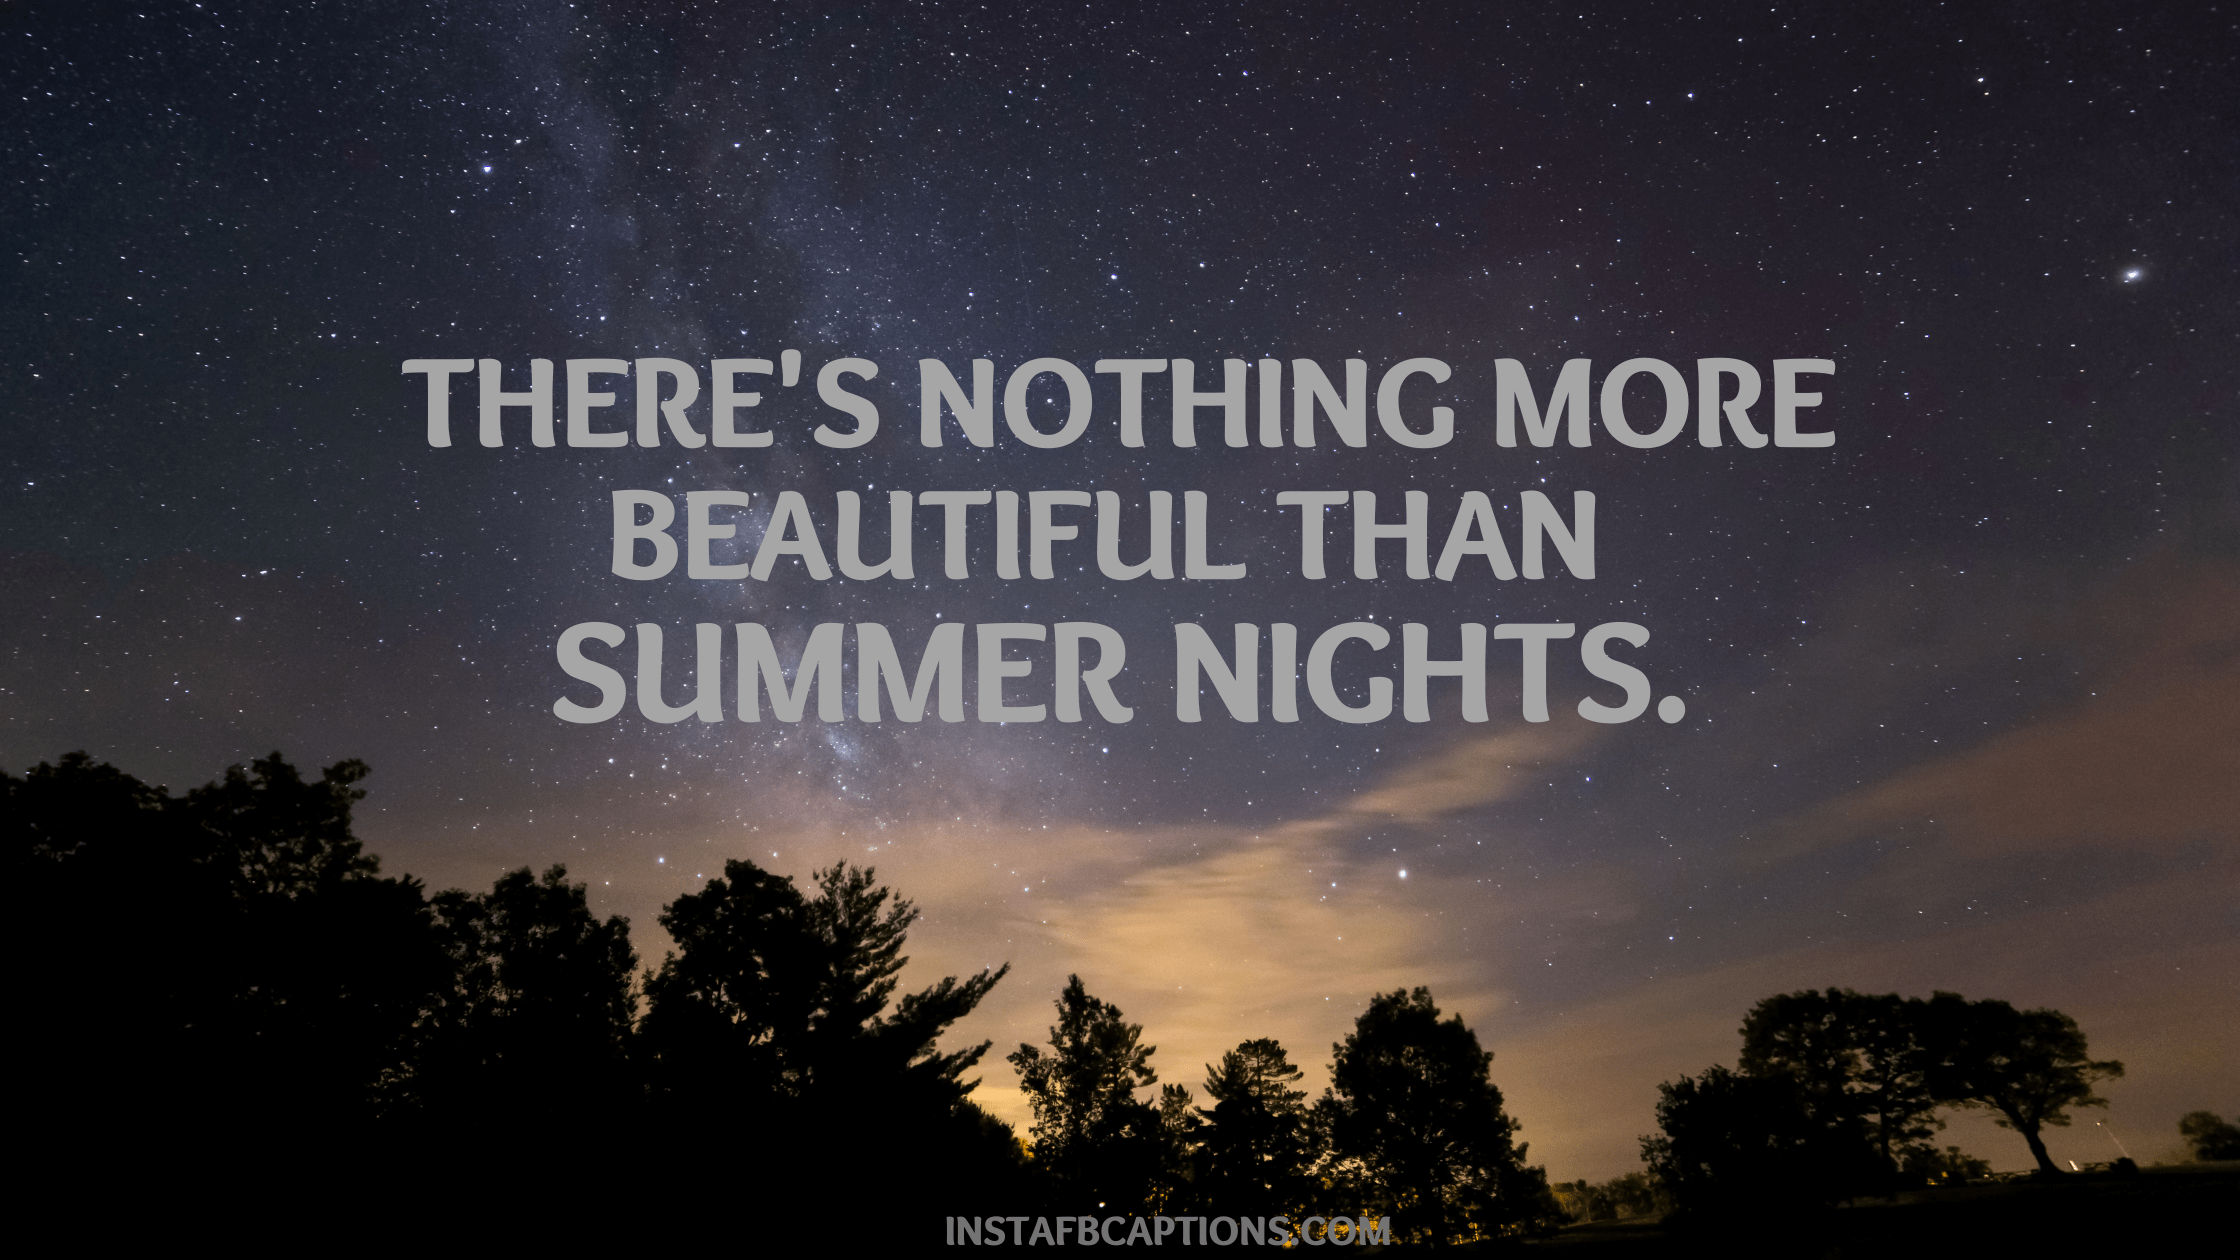 There's nothing more beautiful than summer nights.  - Summer Night Captions for Instagram - Night Captions Quotes for Night Instagram Photos in 2023